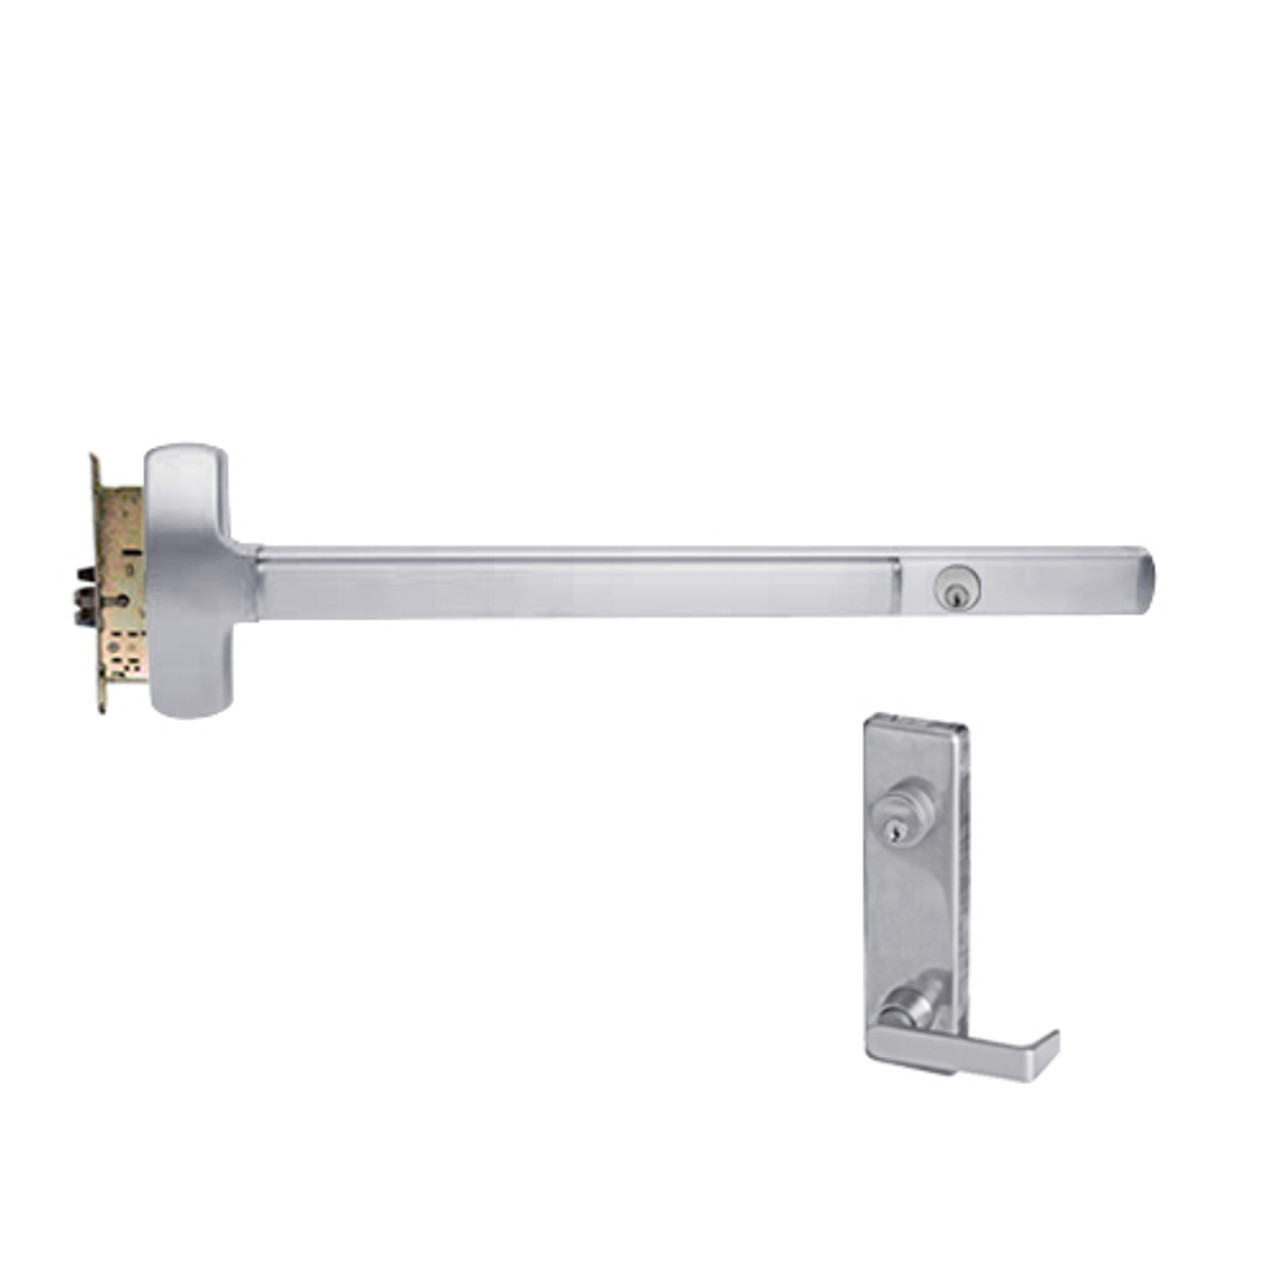 CD25-M-L-DANE-US32-4-LHR Falcon Exit Device in Polished Stainless Steel